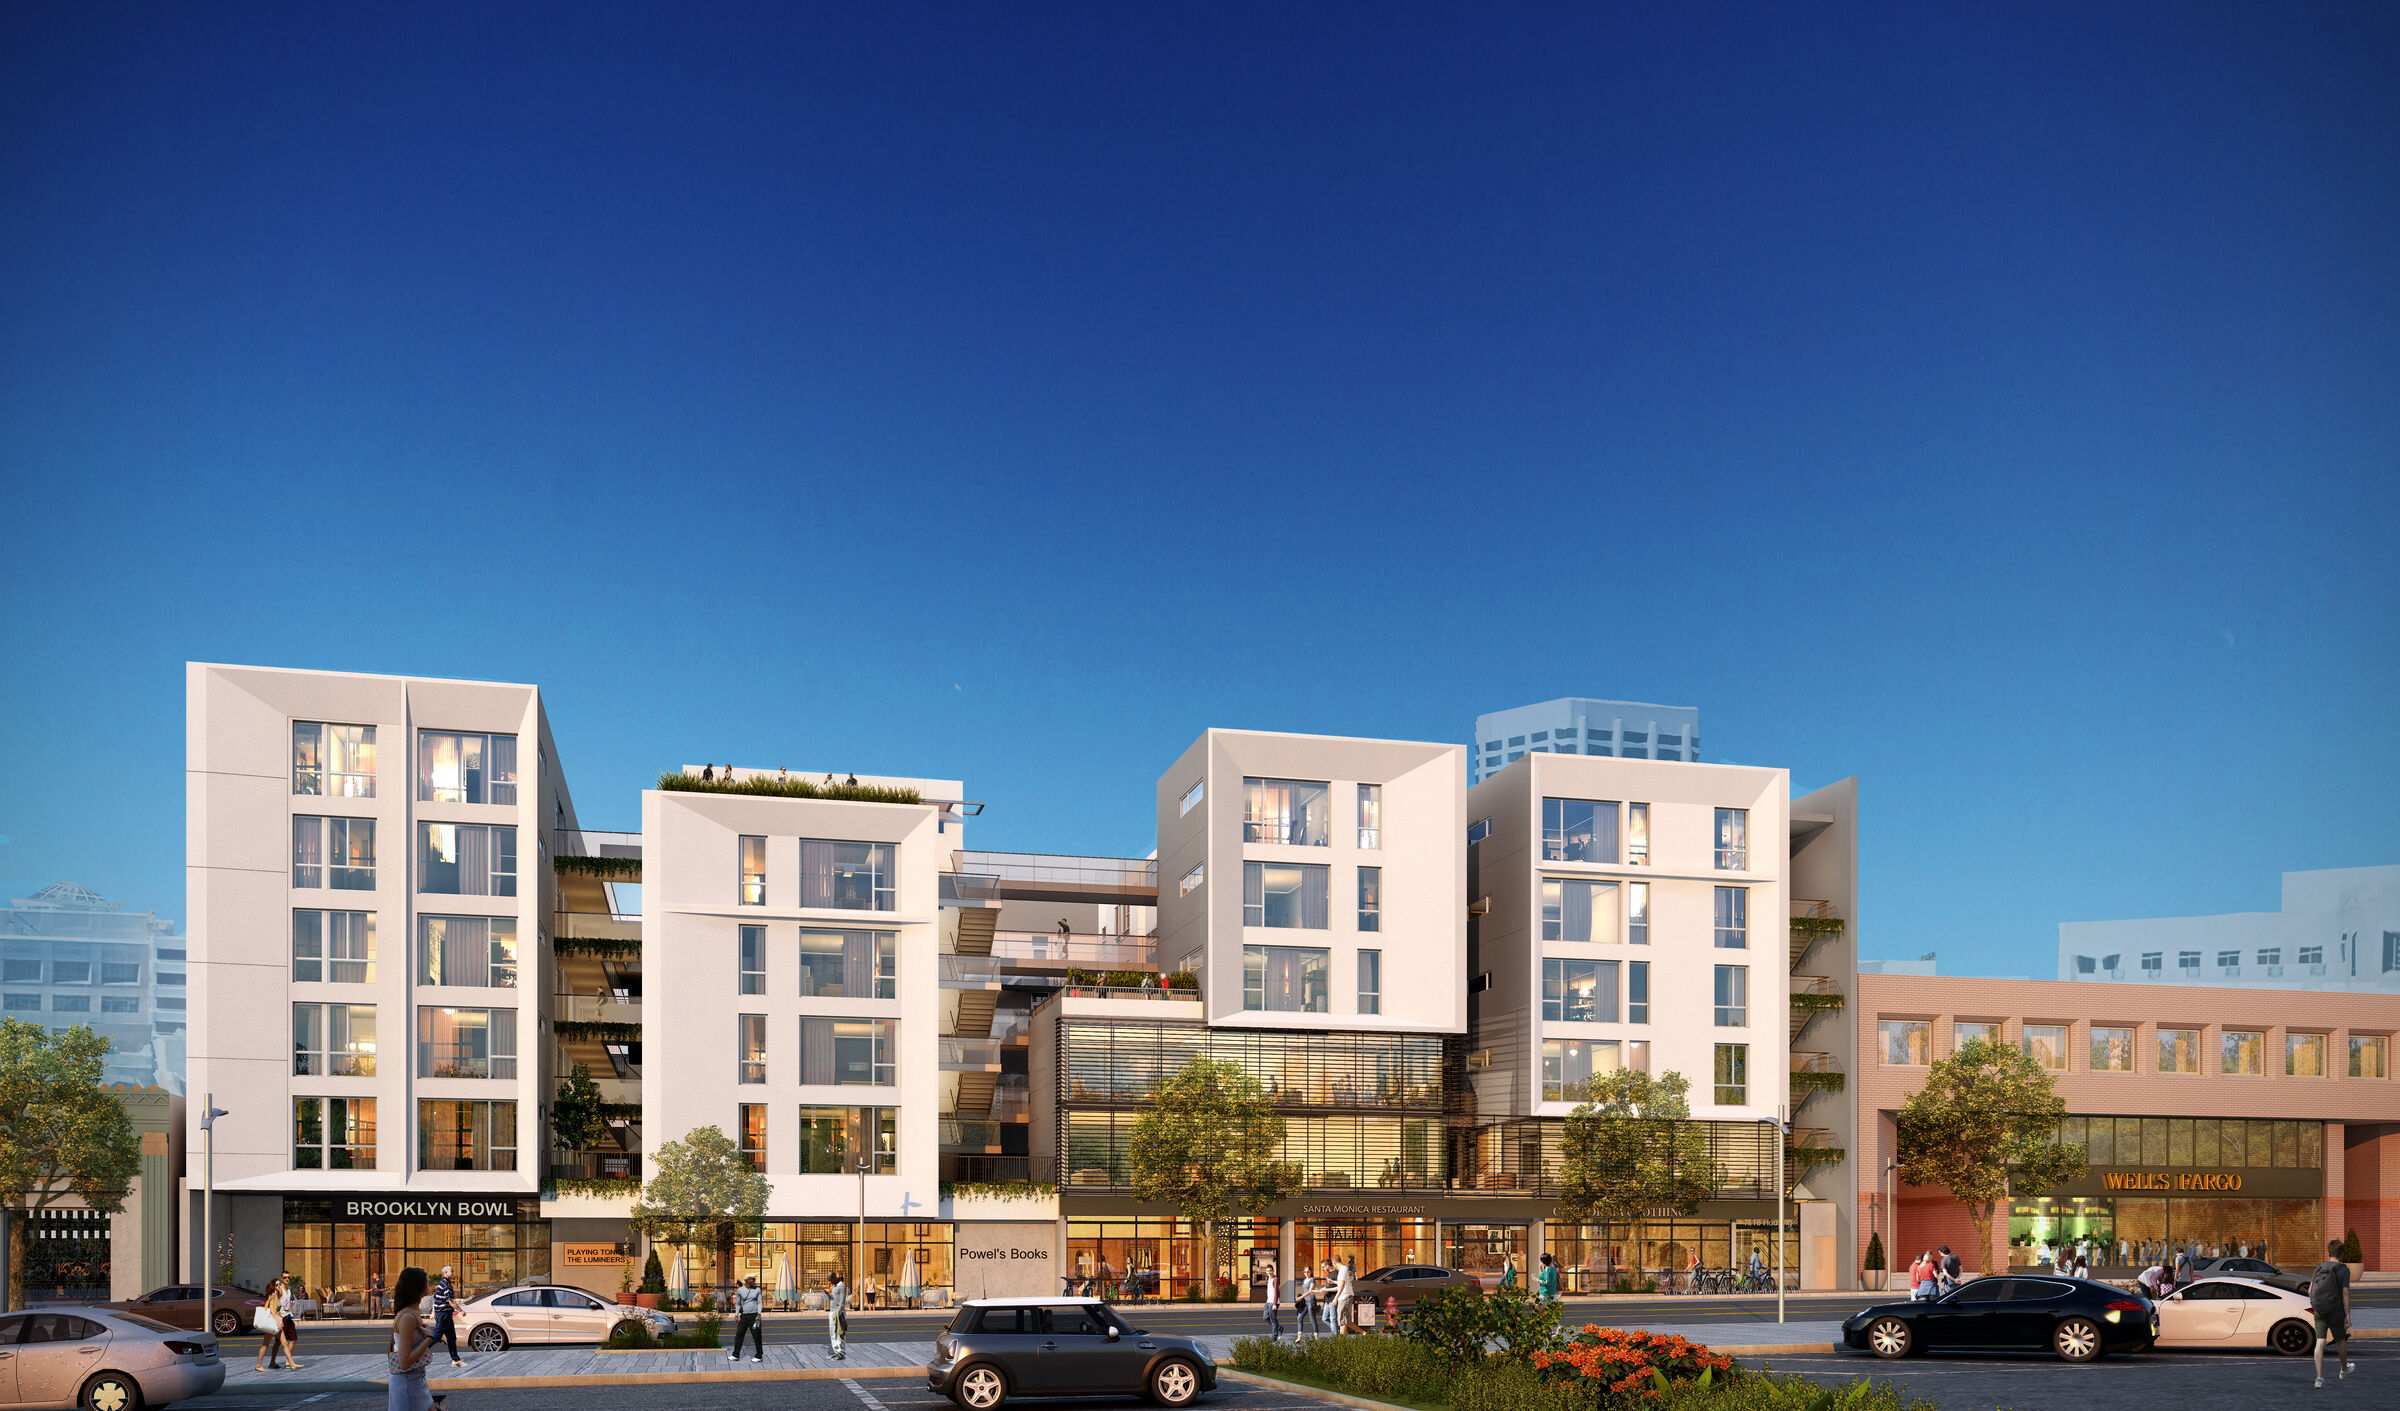 San Diego receives US$24.5 million for affordable housing projects